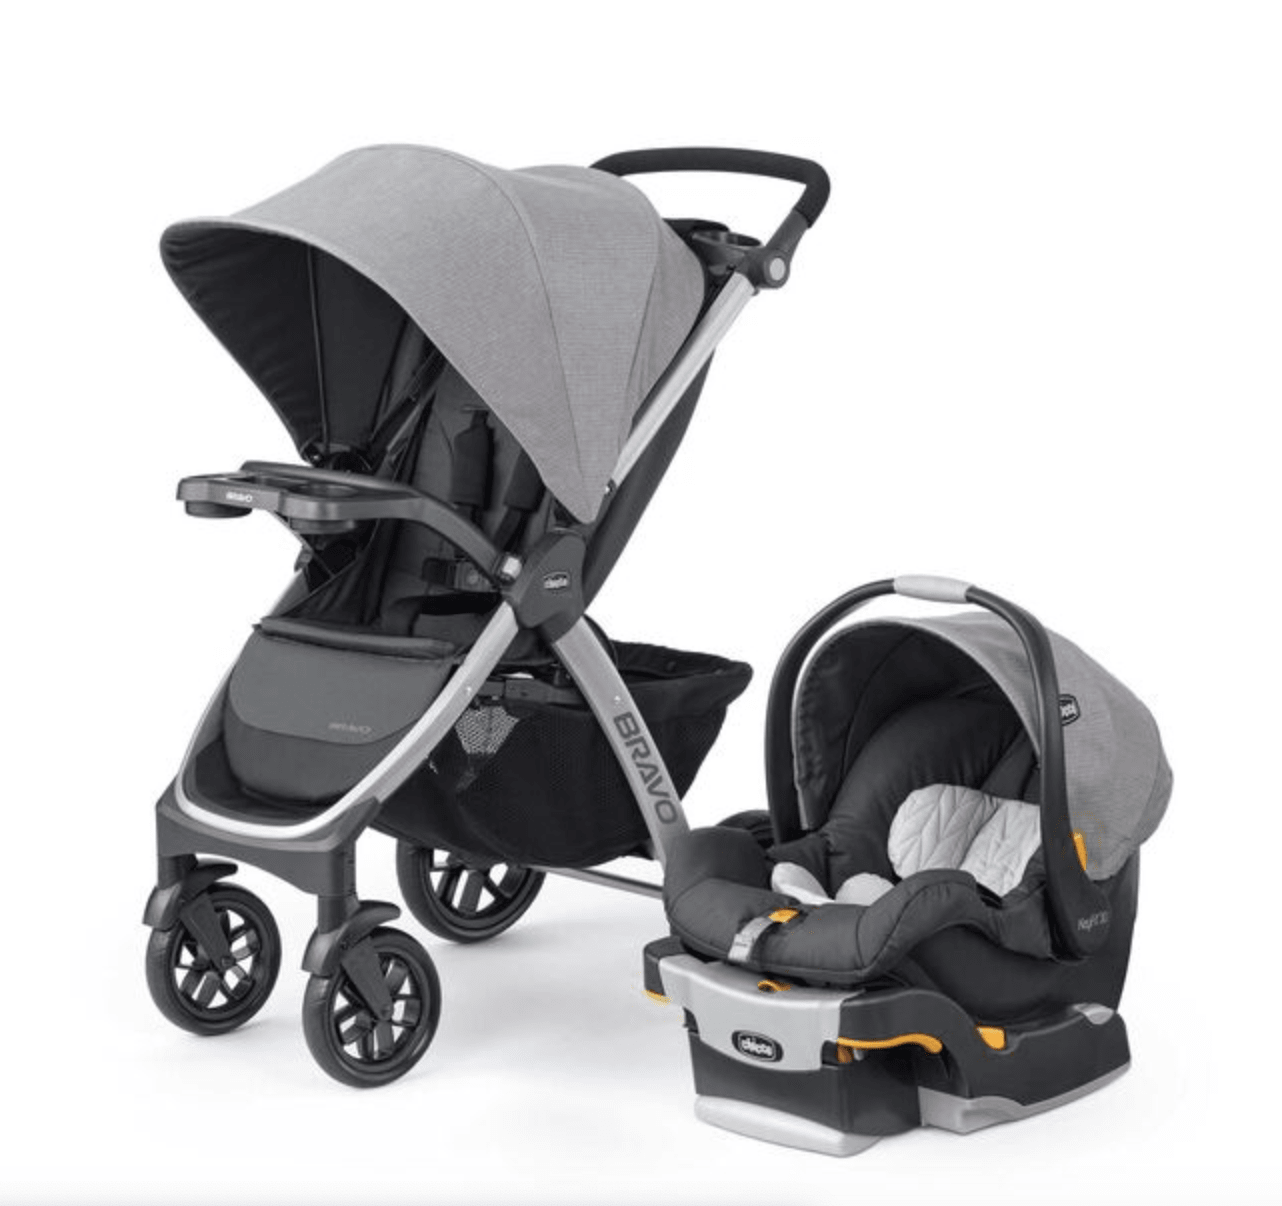 12 Best Strollers Of 2021 Chicco Nuna, Best Rated Strollers And Car Seats 2020